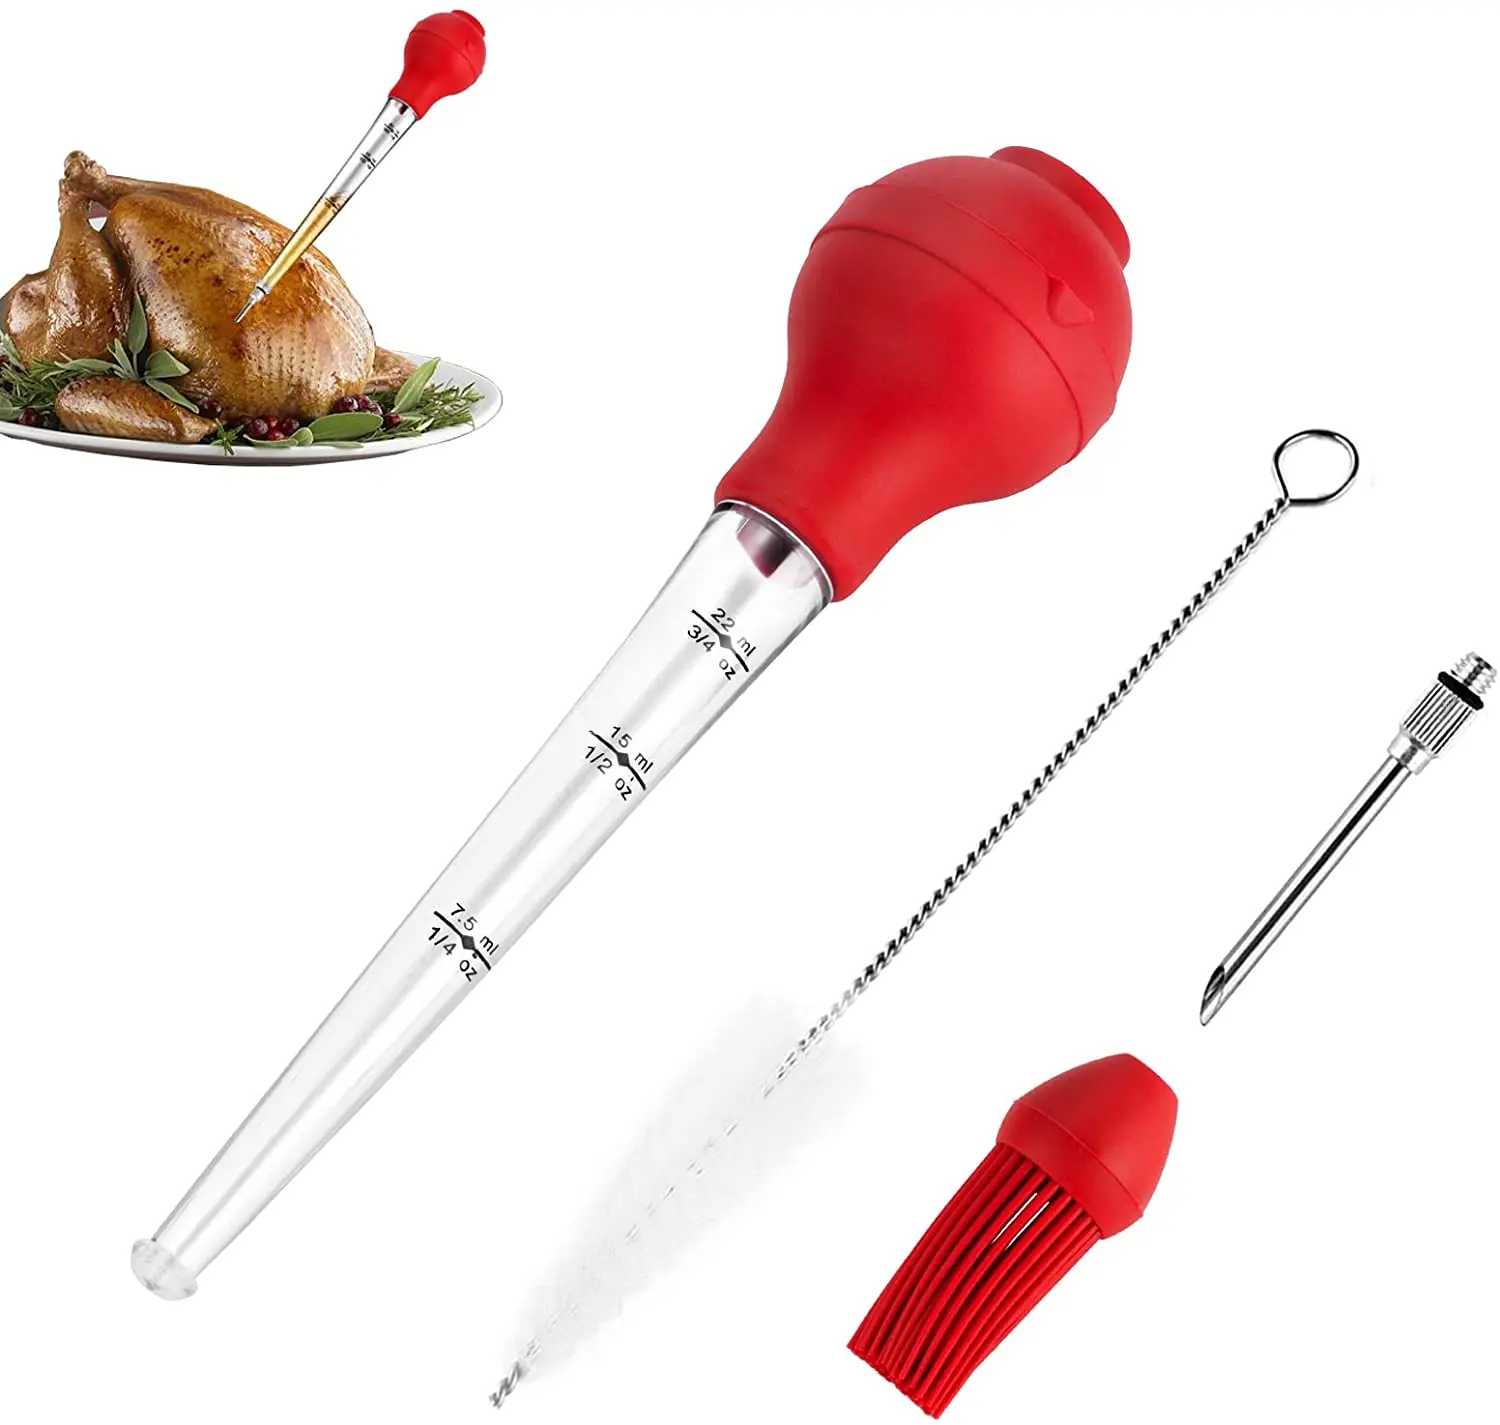 

Turkey Baster with Barbecue Basting Brush Baster Syringe Turkey Include Detachable Food Grade Silicone Bulb Meat Injector